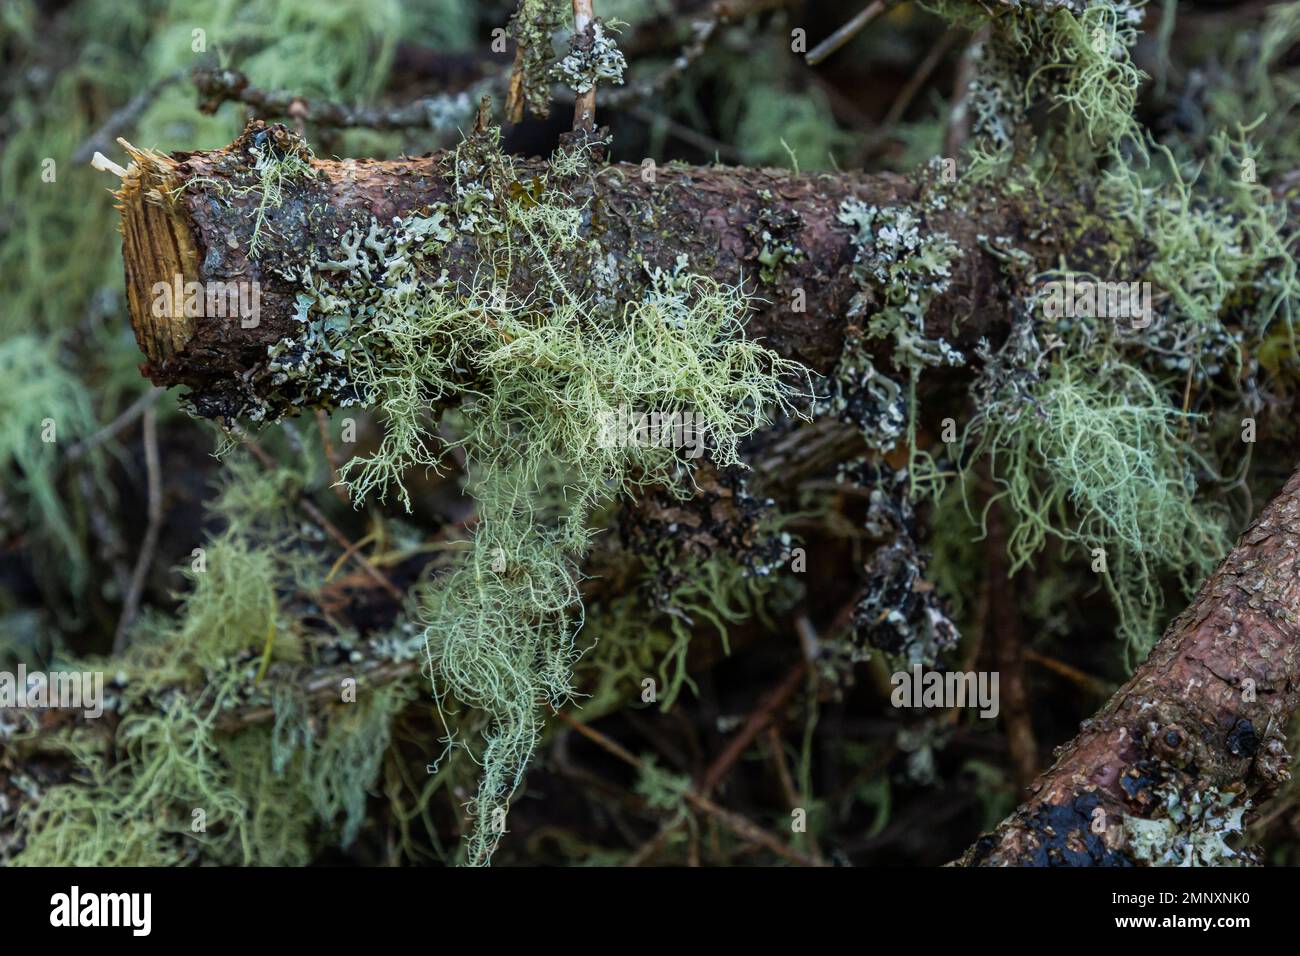 Closeup of lichen Usnea Filipendula and a parasite plant in a tree branch. Photo taken in the morning with the dew drops. Stock Photo